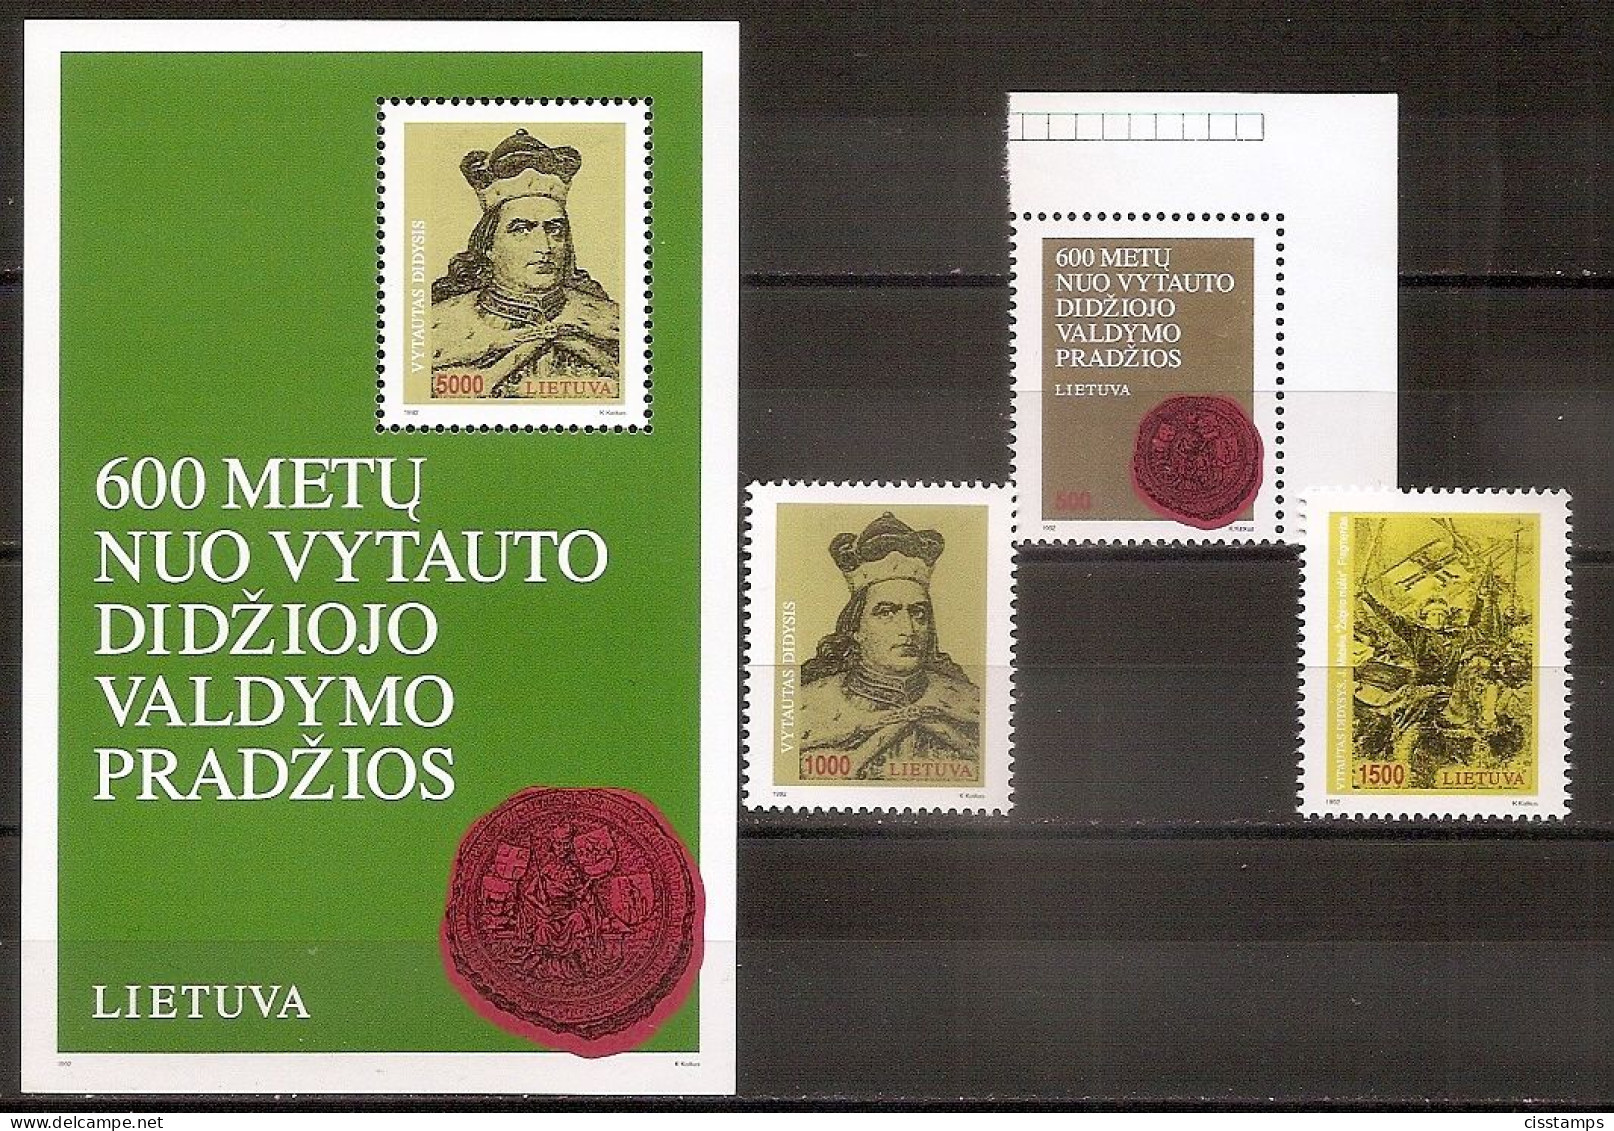 LITHUANIA 1993●600th Anniversary Of Accession Of Duke Vytautas●Mi 518-20, Bl3●MNH - Lithuania